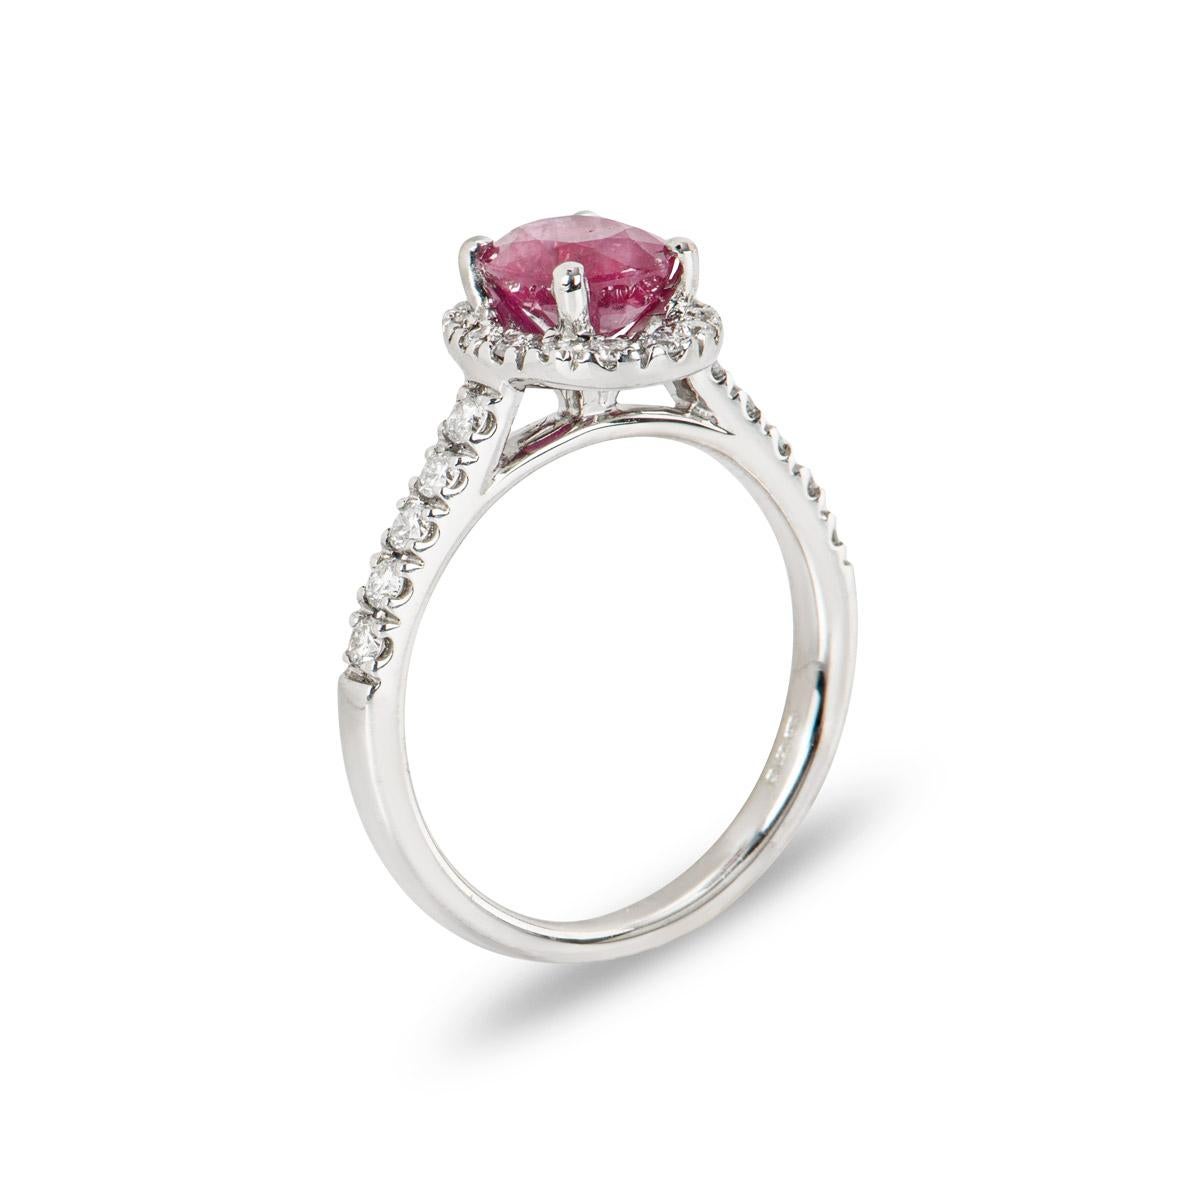 A beautiful 18k white gold ruby and diamond halo ring. The ring is set to the centre with an oval cut ruby weighing 1.53ct, displaying a medium red hue. Accentuating the ruby are 24 round brilliant cut diamonds adorning the halo and shoulders with